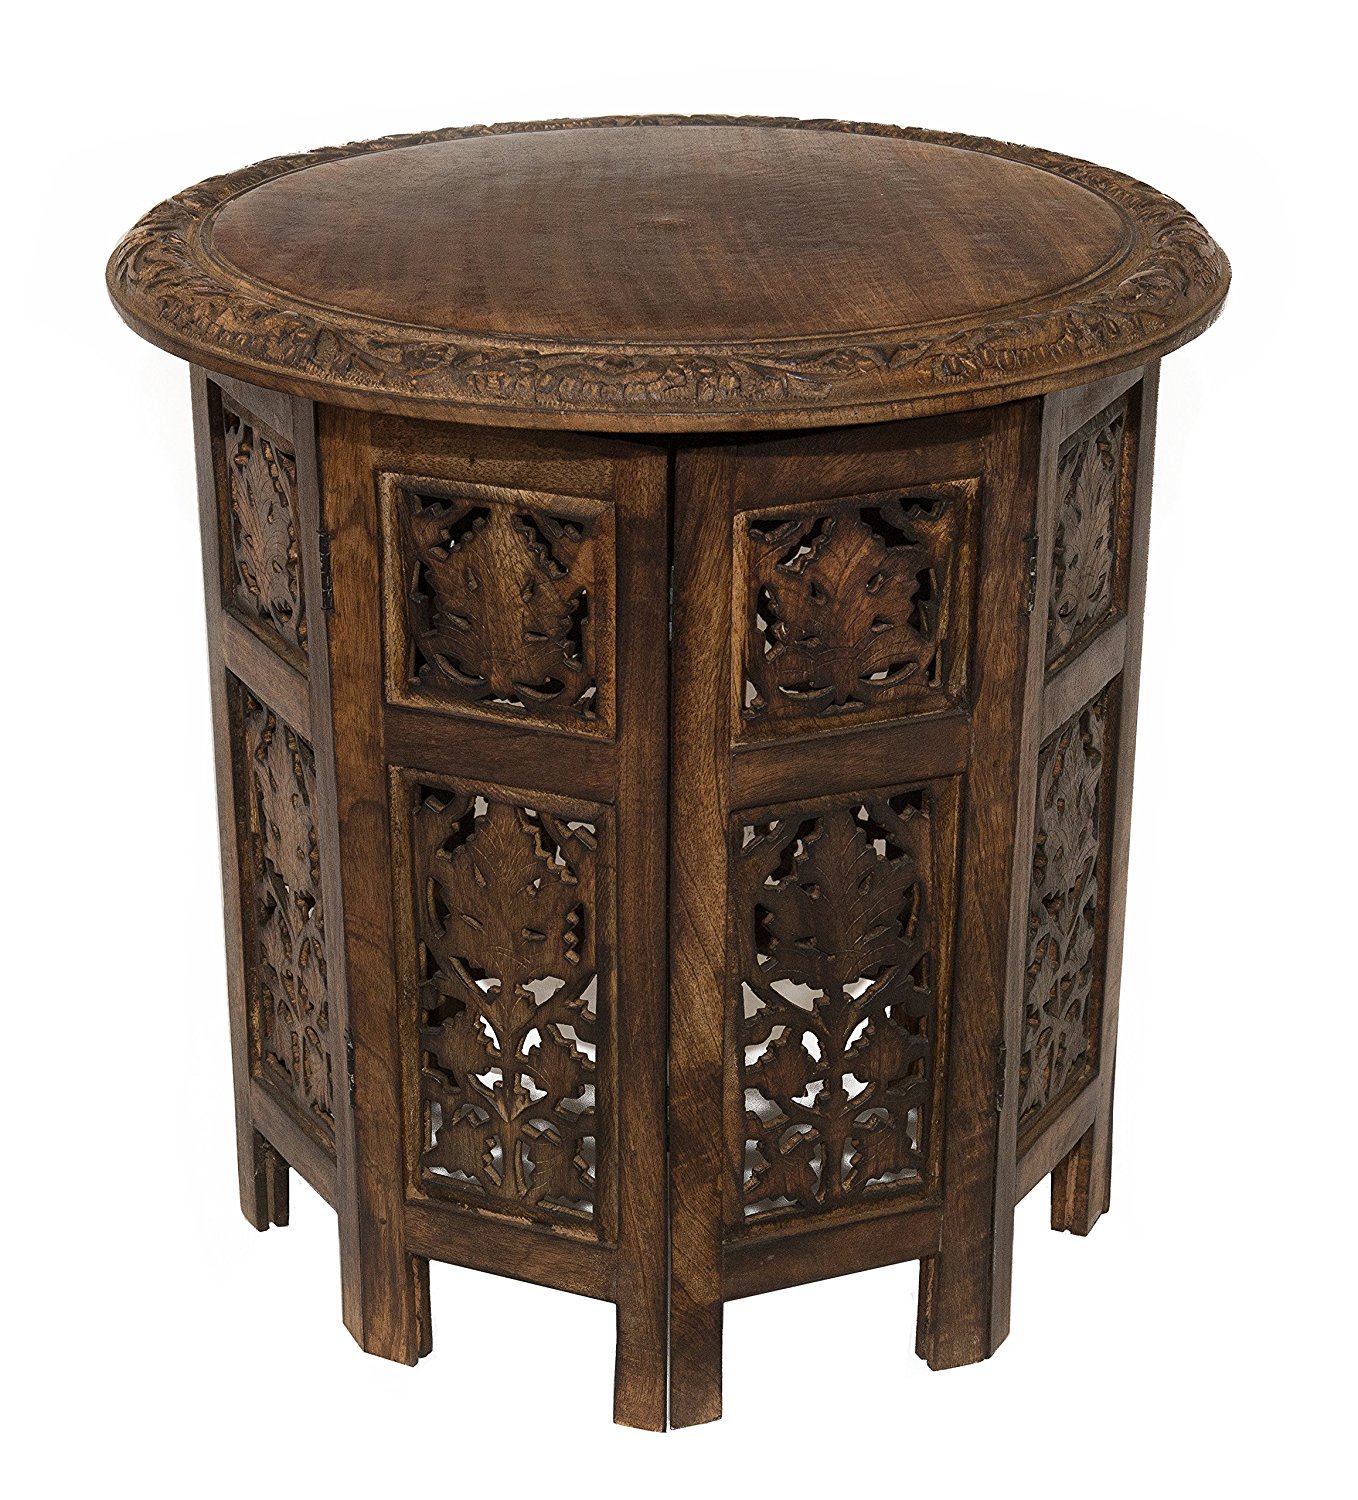 lovely small accent table for ornate with drawer wooden round marble pub set tory burch pearl necklace acrylic nautical dining room tile patio counter height glass lamps bedroom